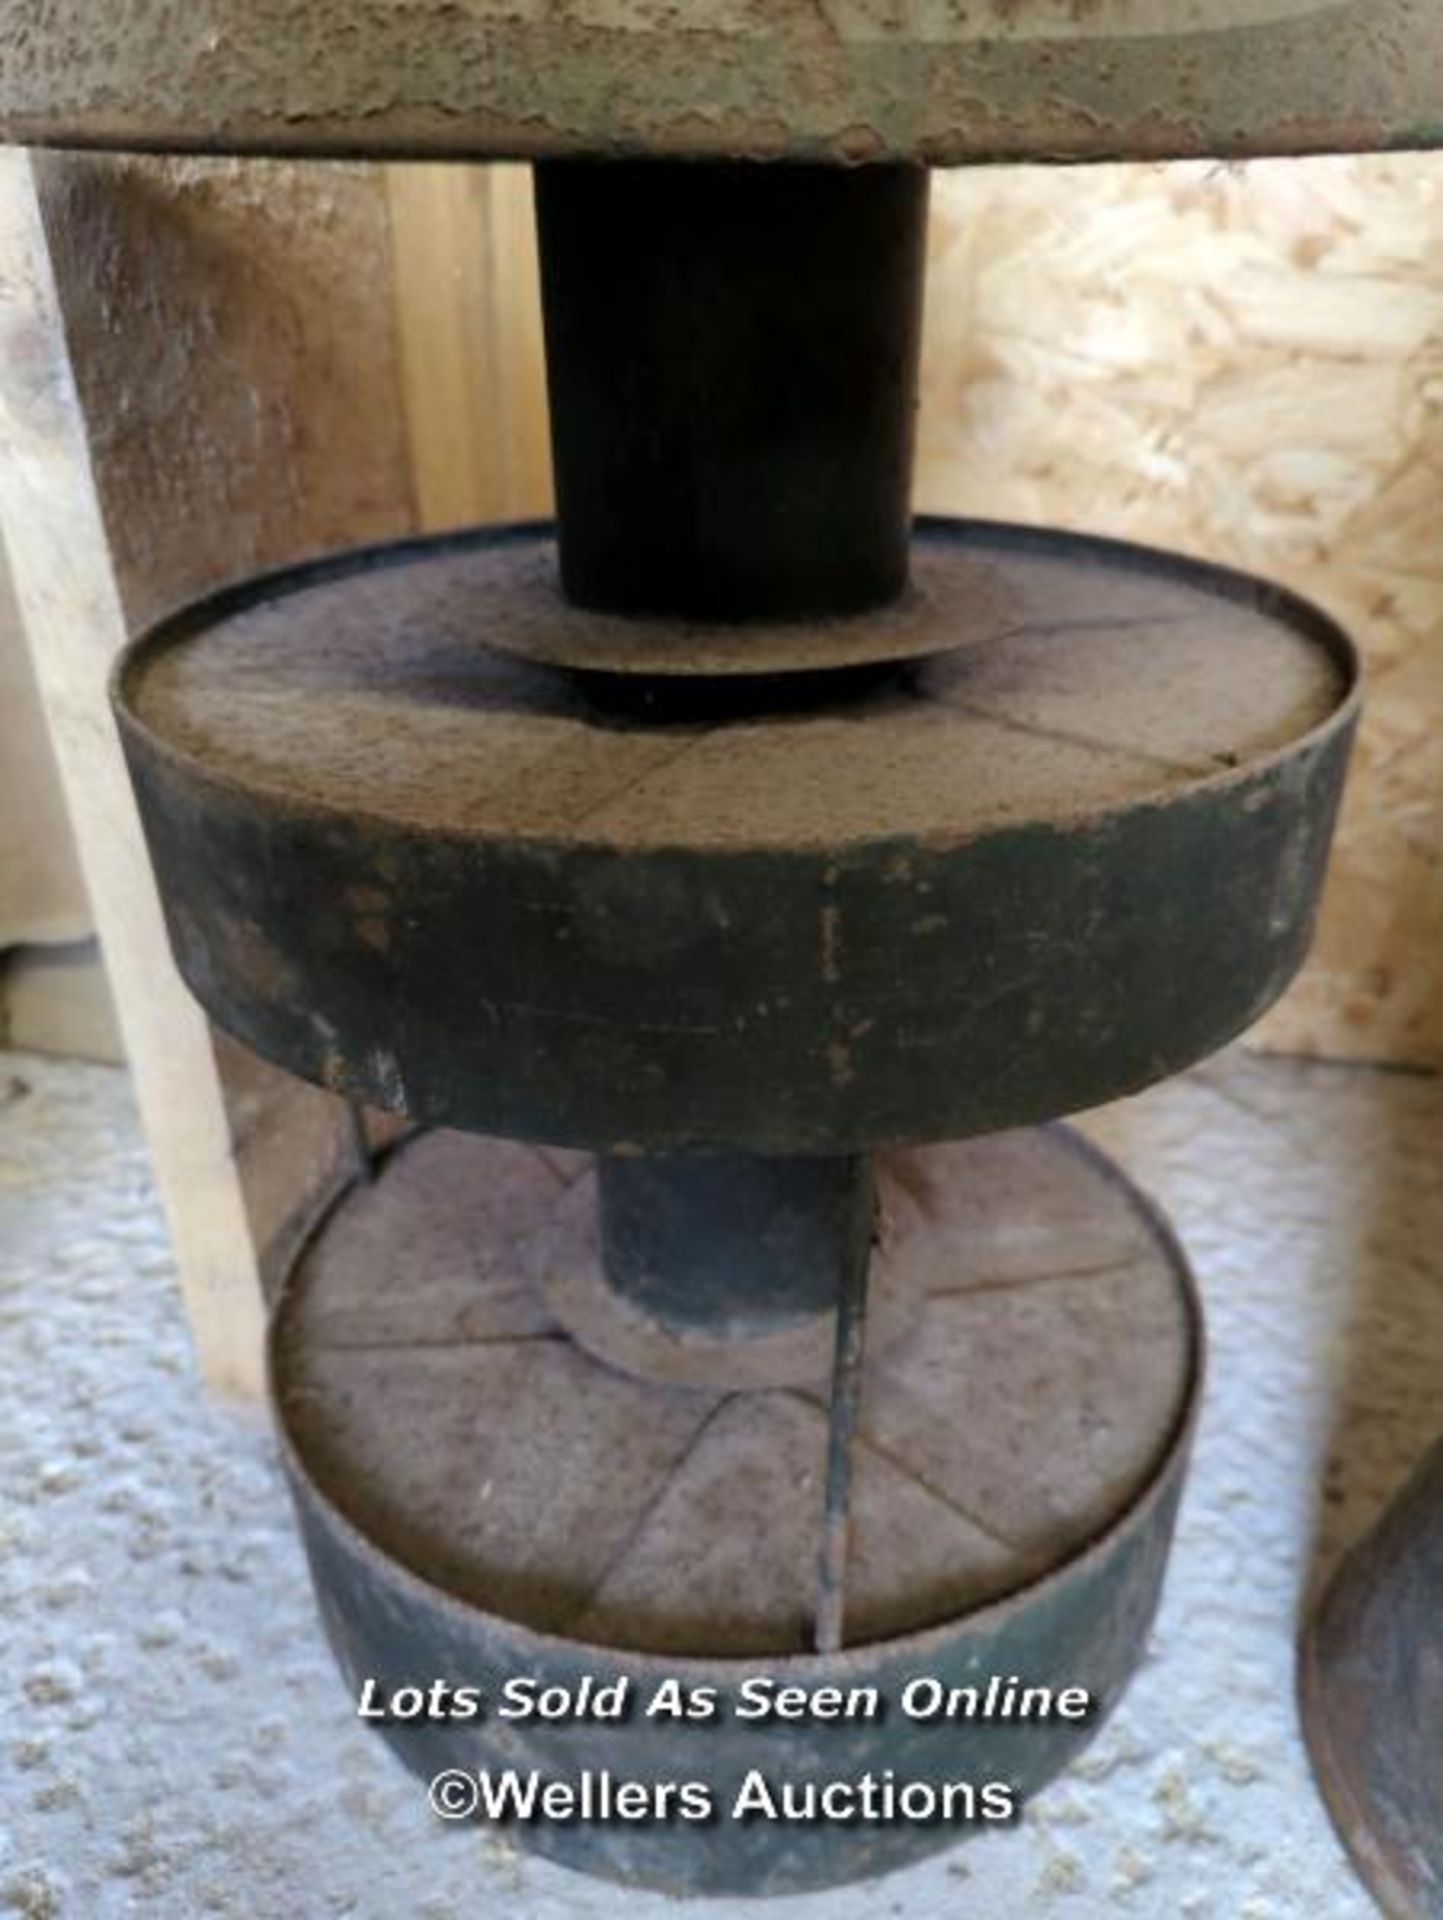 *PRICE MOTORINE 'THE OILER OIL' OIL HOSE SPOOL, 28 INCHES HIGH / ALL LOTS ARE LOCATED AT AUTHENTIC - Image 3 of 3